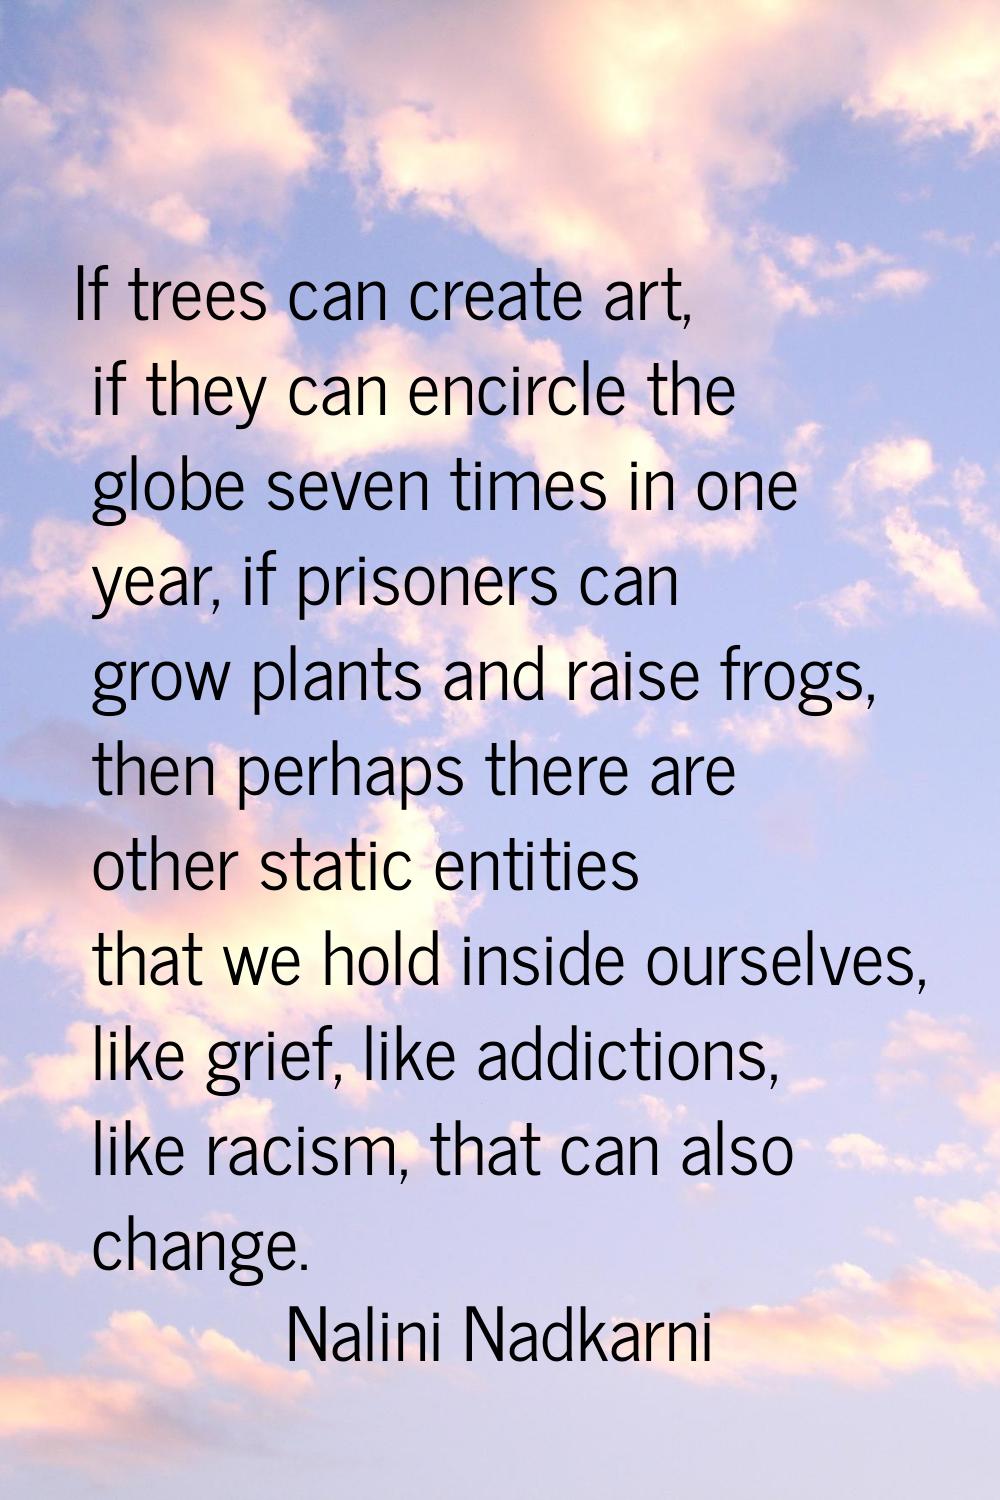 If trees can create art, if they can encircle the globe seven times in one year, if prisoners can g